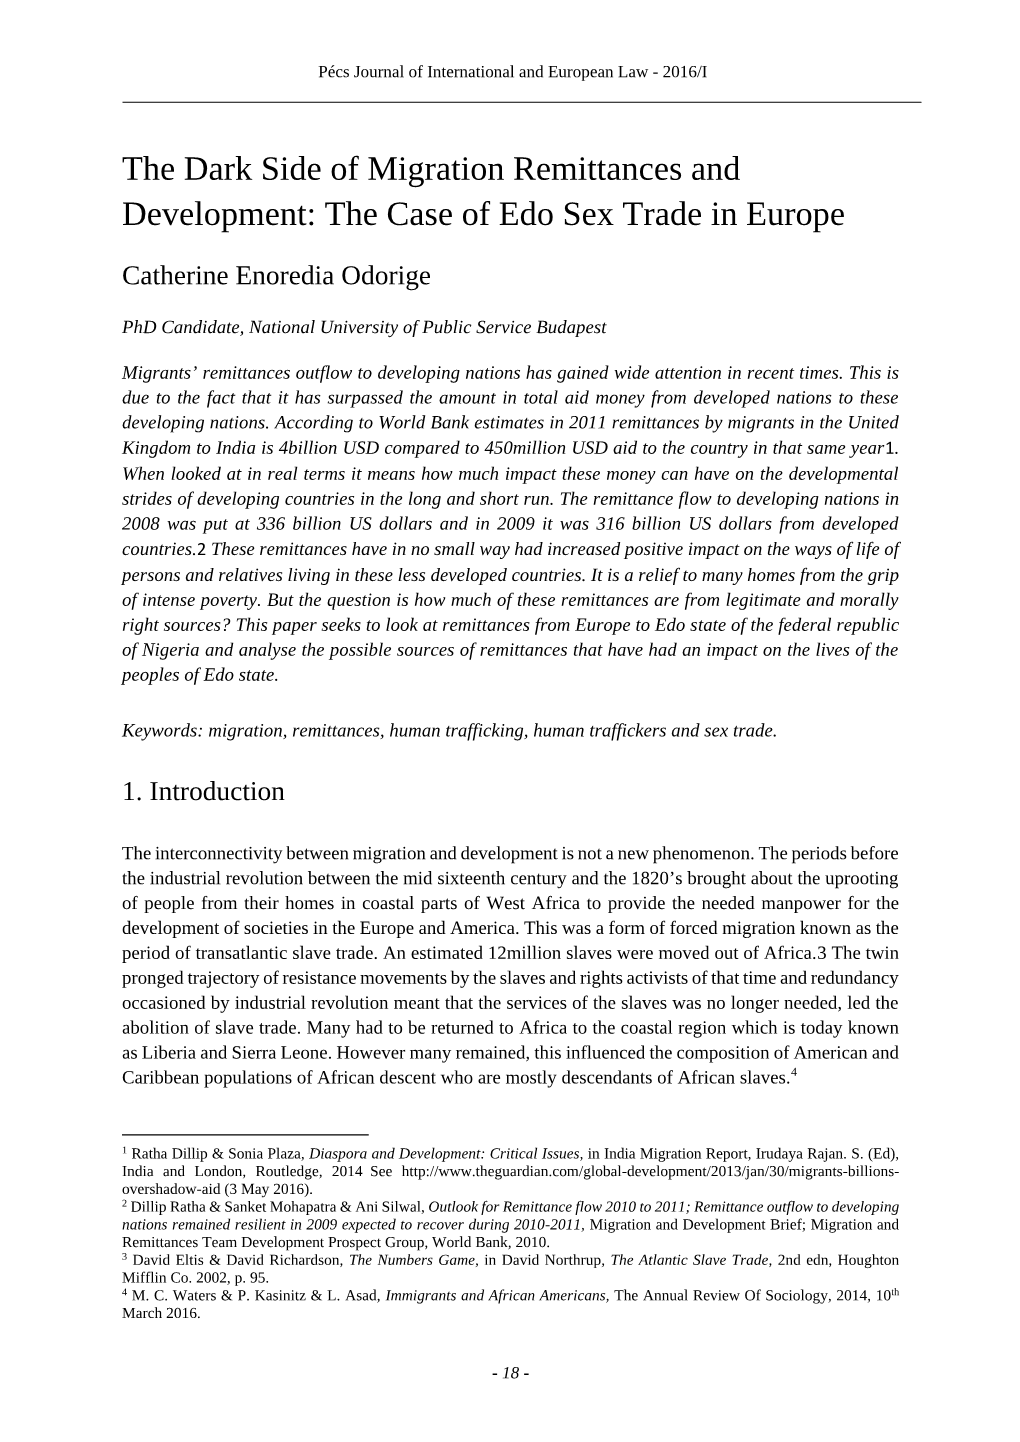 The Dark Side of Migration Remittances and Development: the Case of Edo Sex Trade in Europe